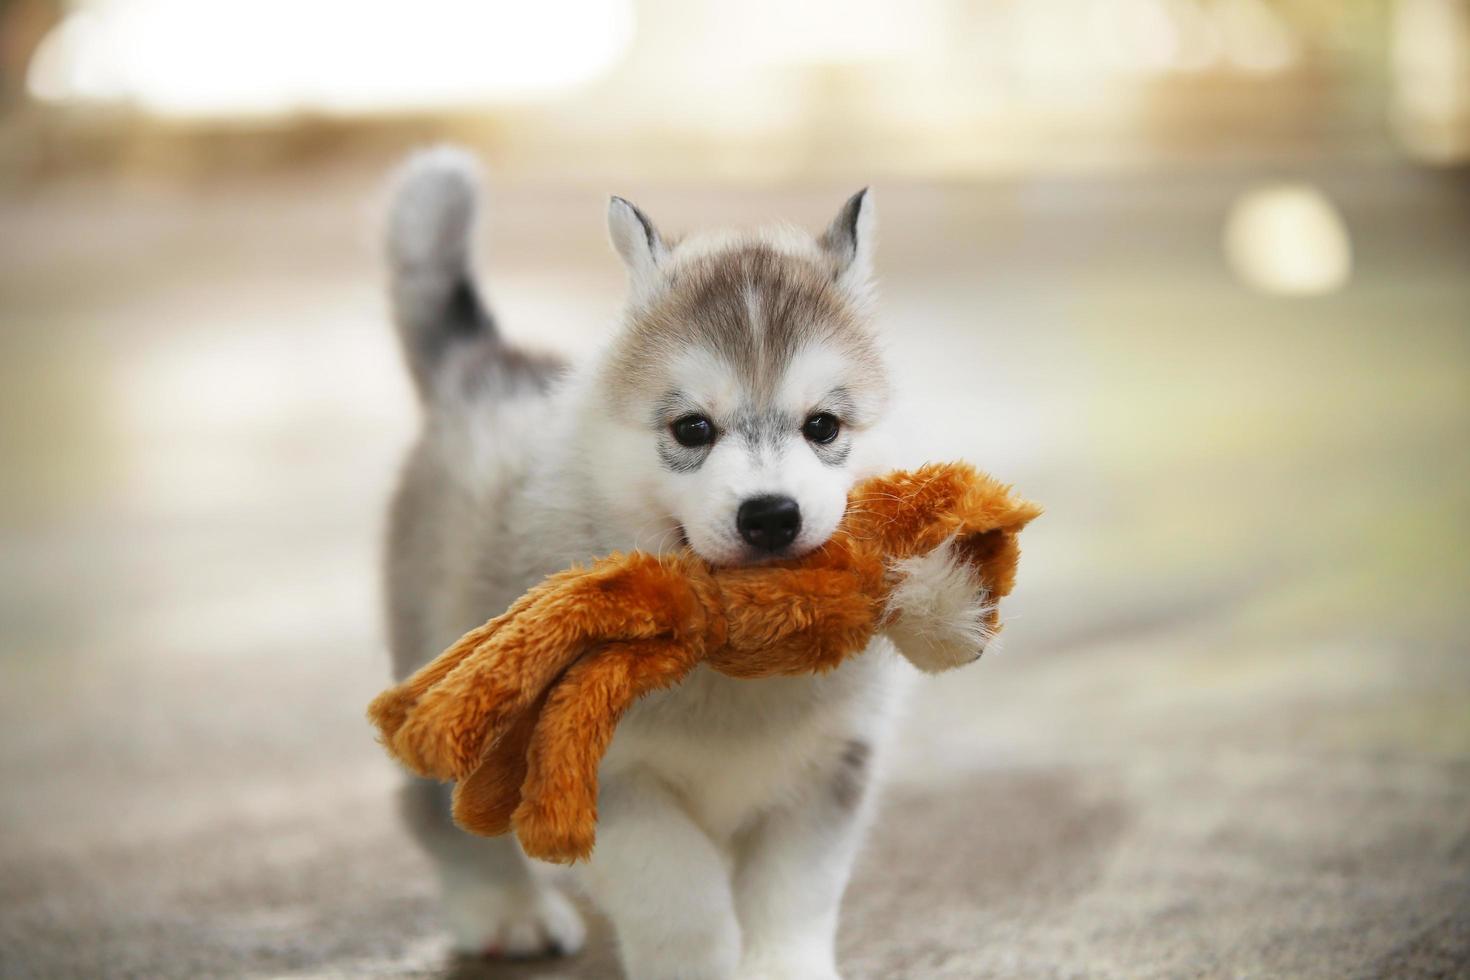 Siberian husky puppy playing with doll. Fluffy puppy with toy in mouth. photo